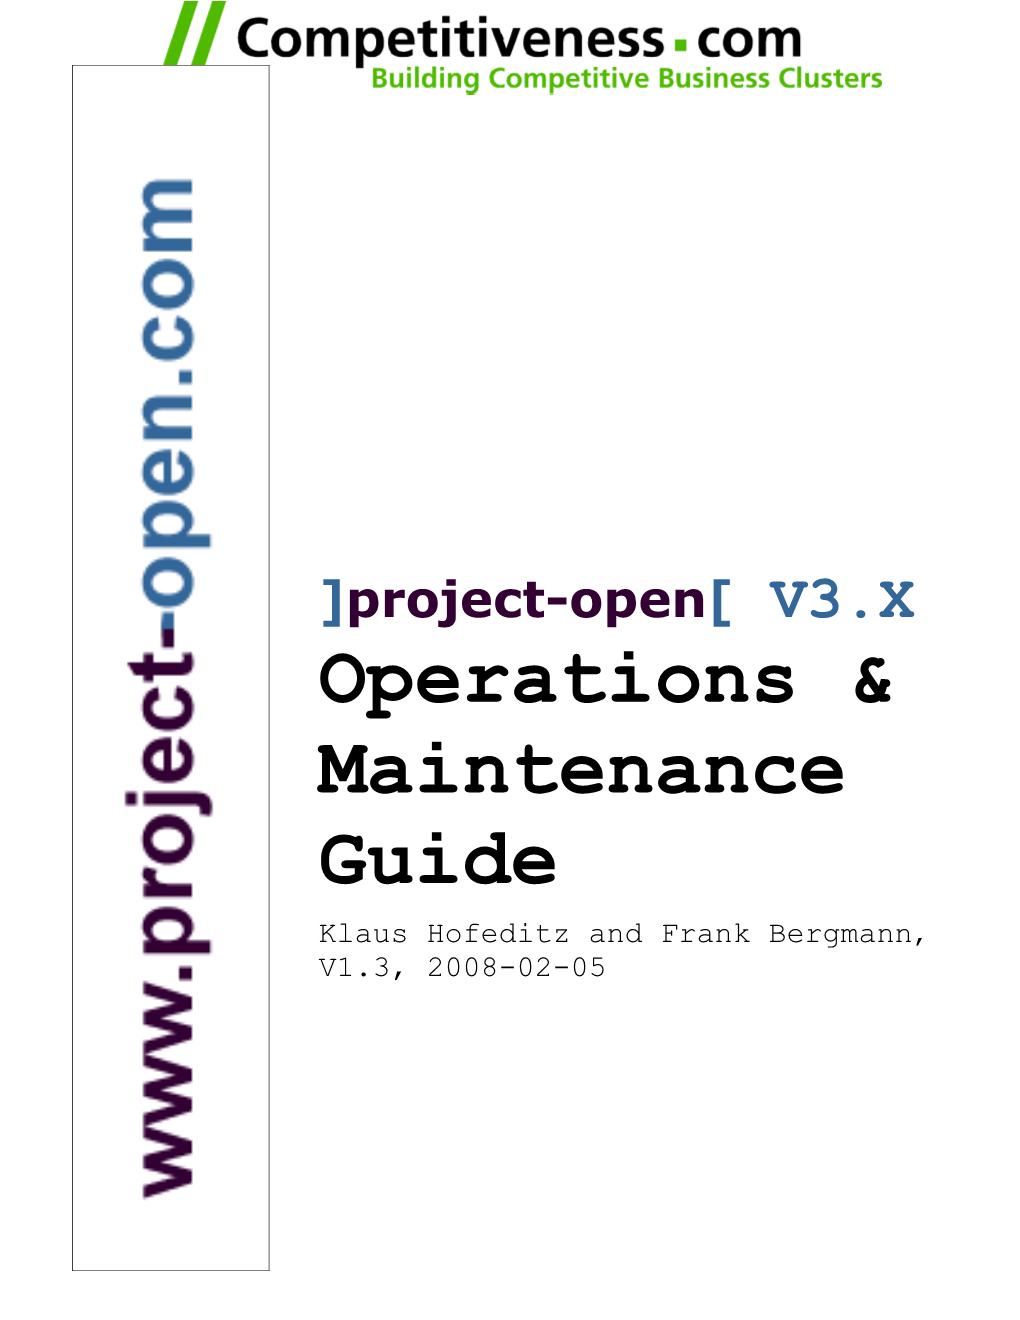 PO Operations & Maintenance Guide